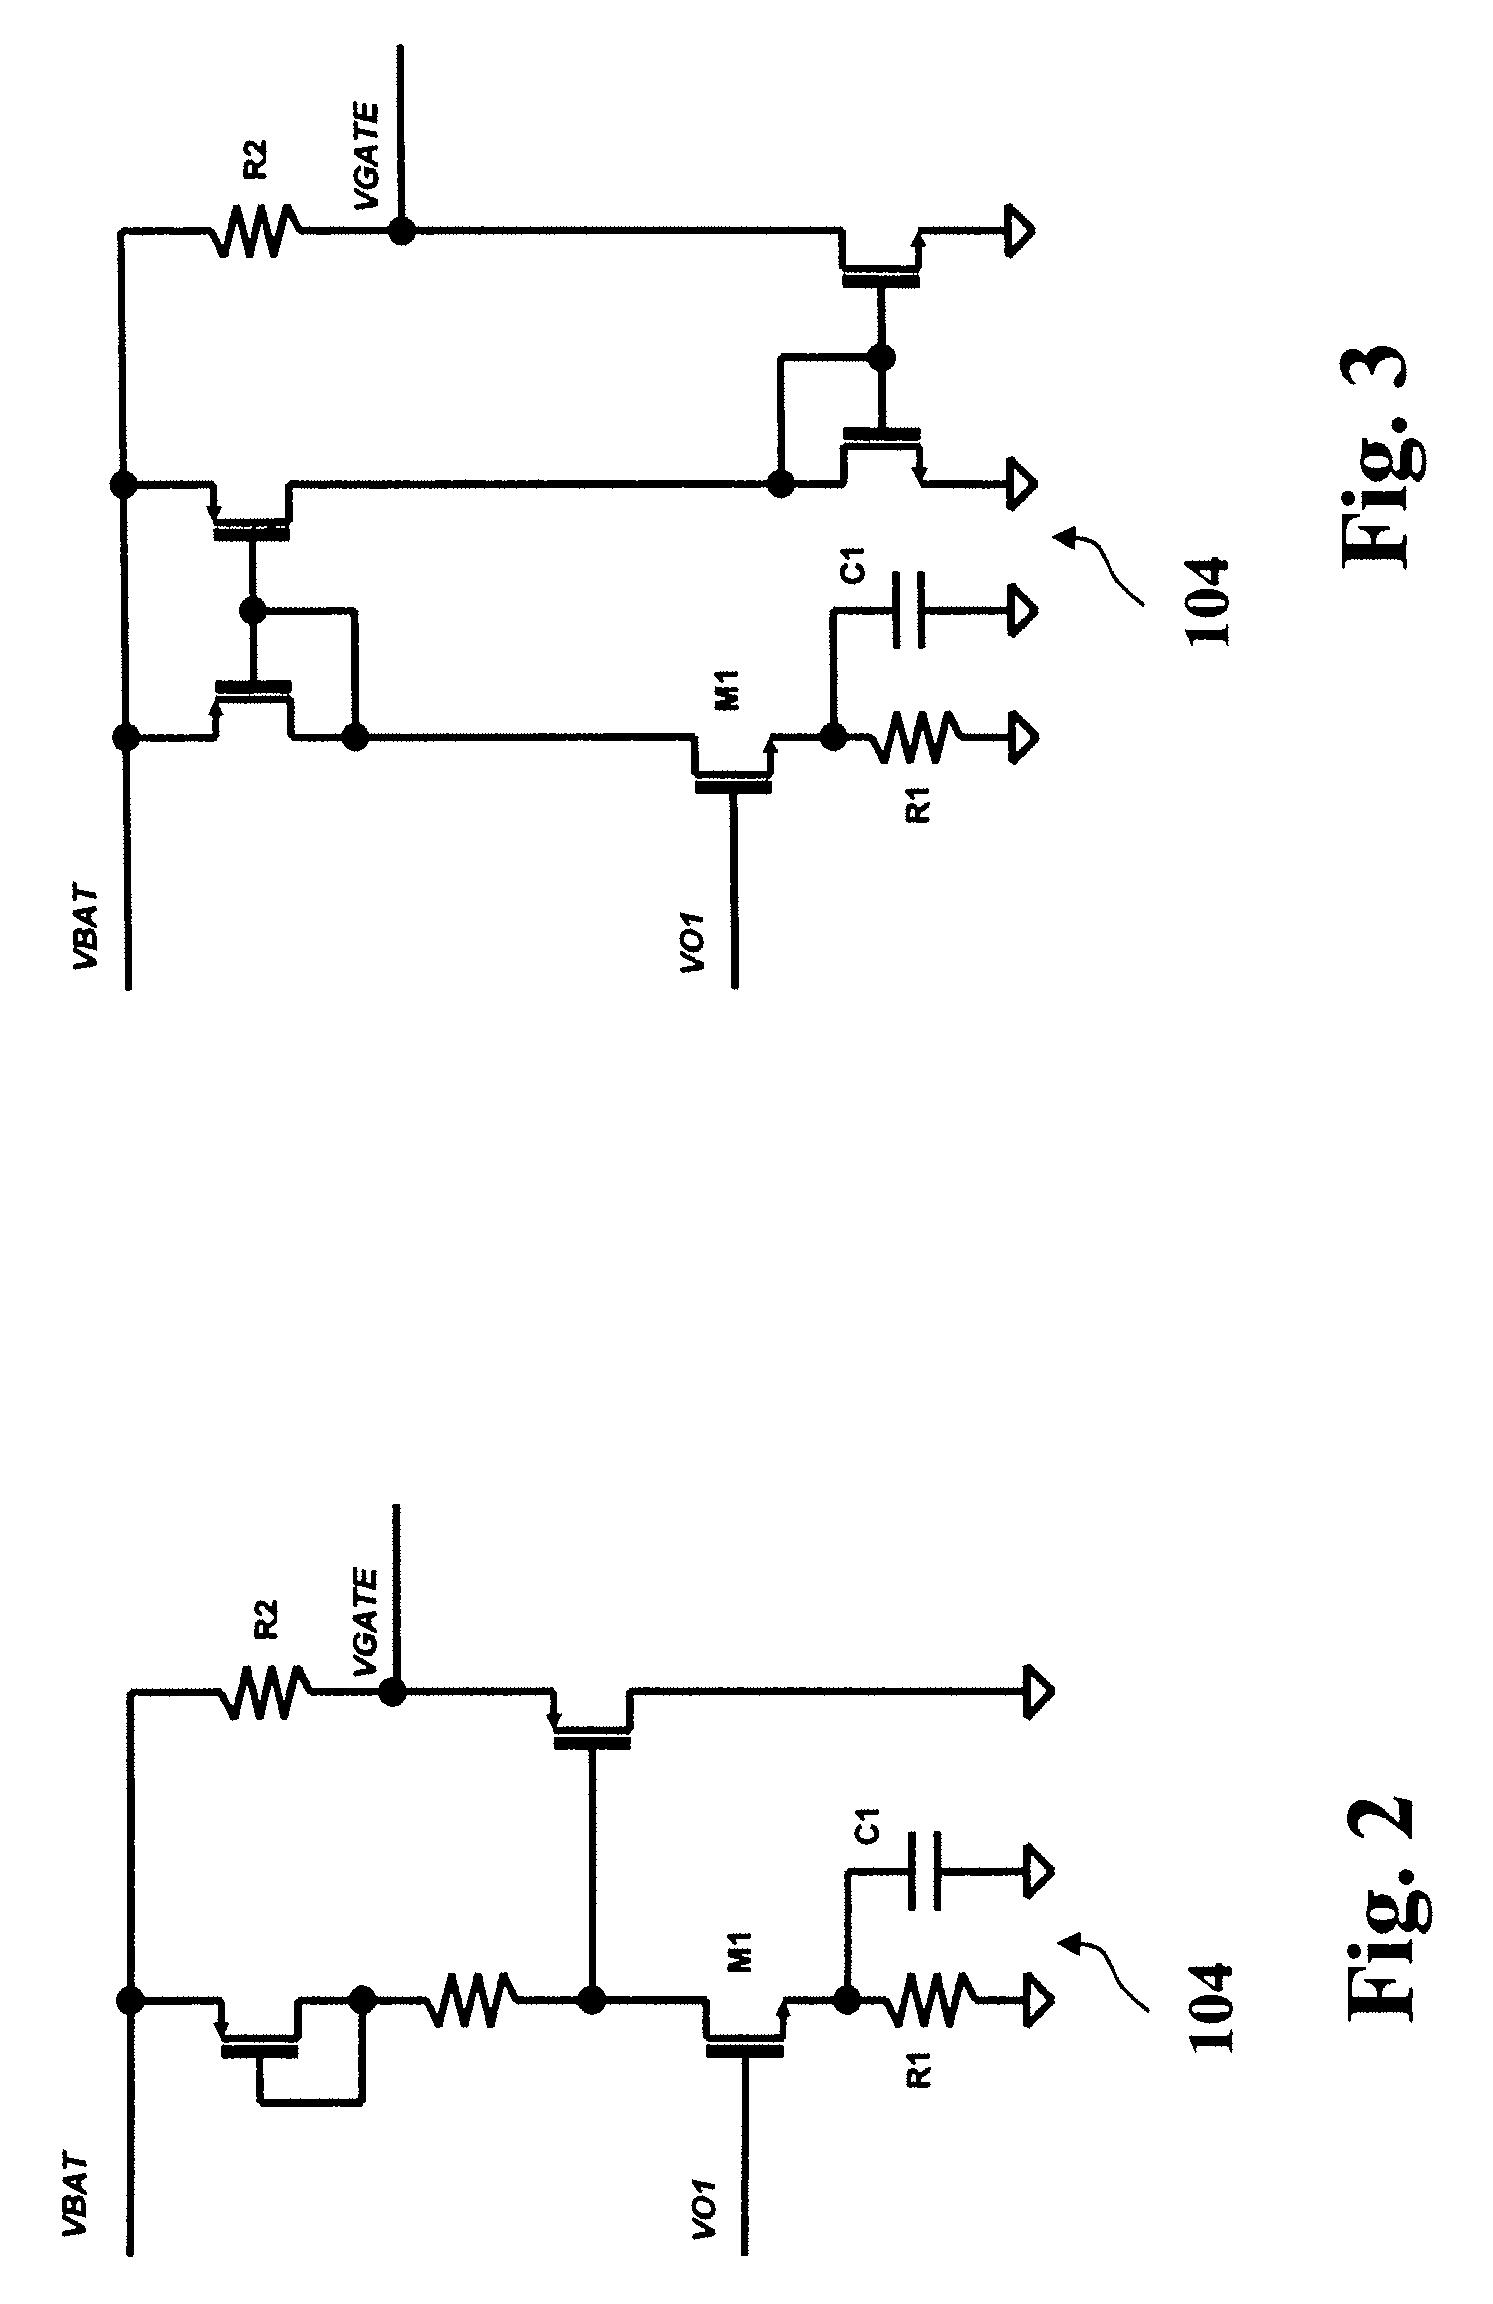 Enhanced efficiency low-dropout linear regulator and corresponding method